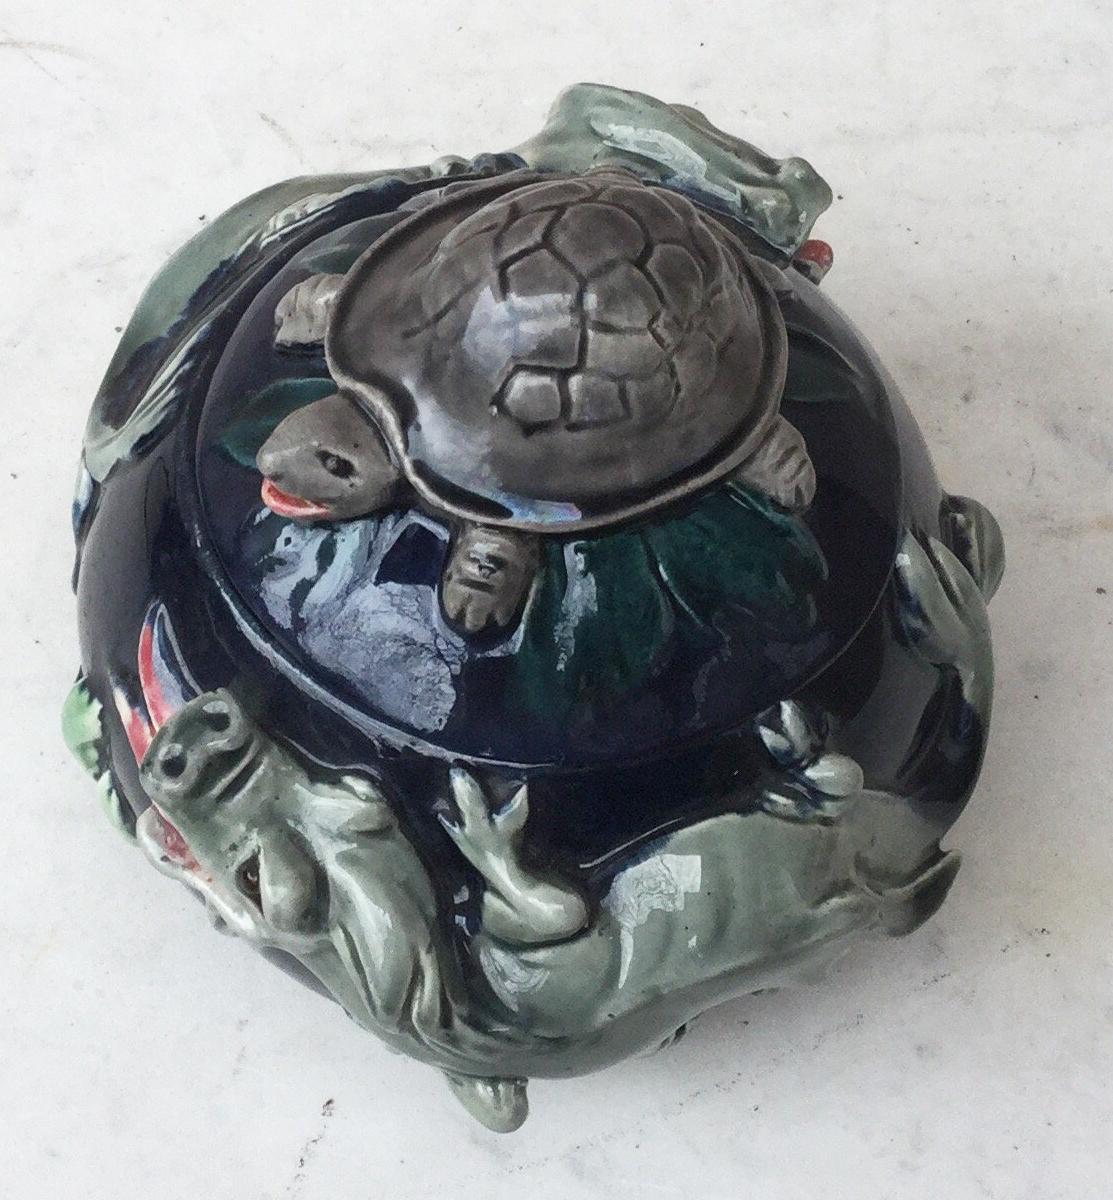 Unusual Majolica tobacco jar with dragons signed Thomas Sergent, circa 1880.
A turtle on the handle.